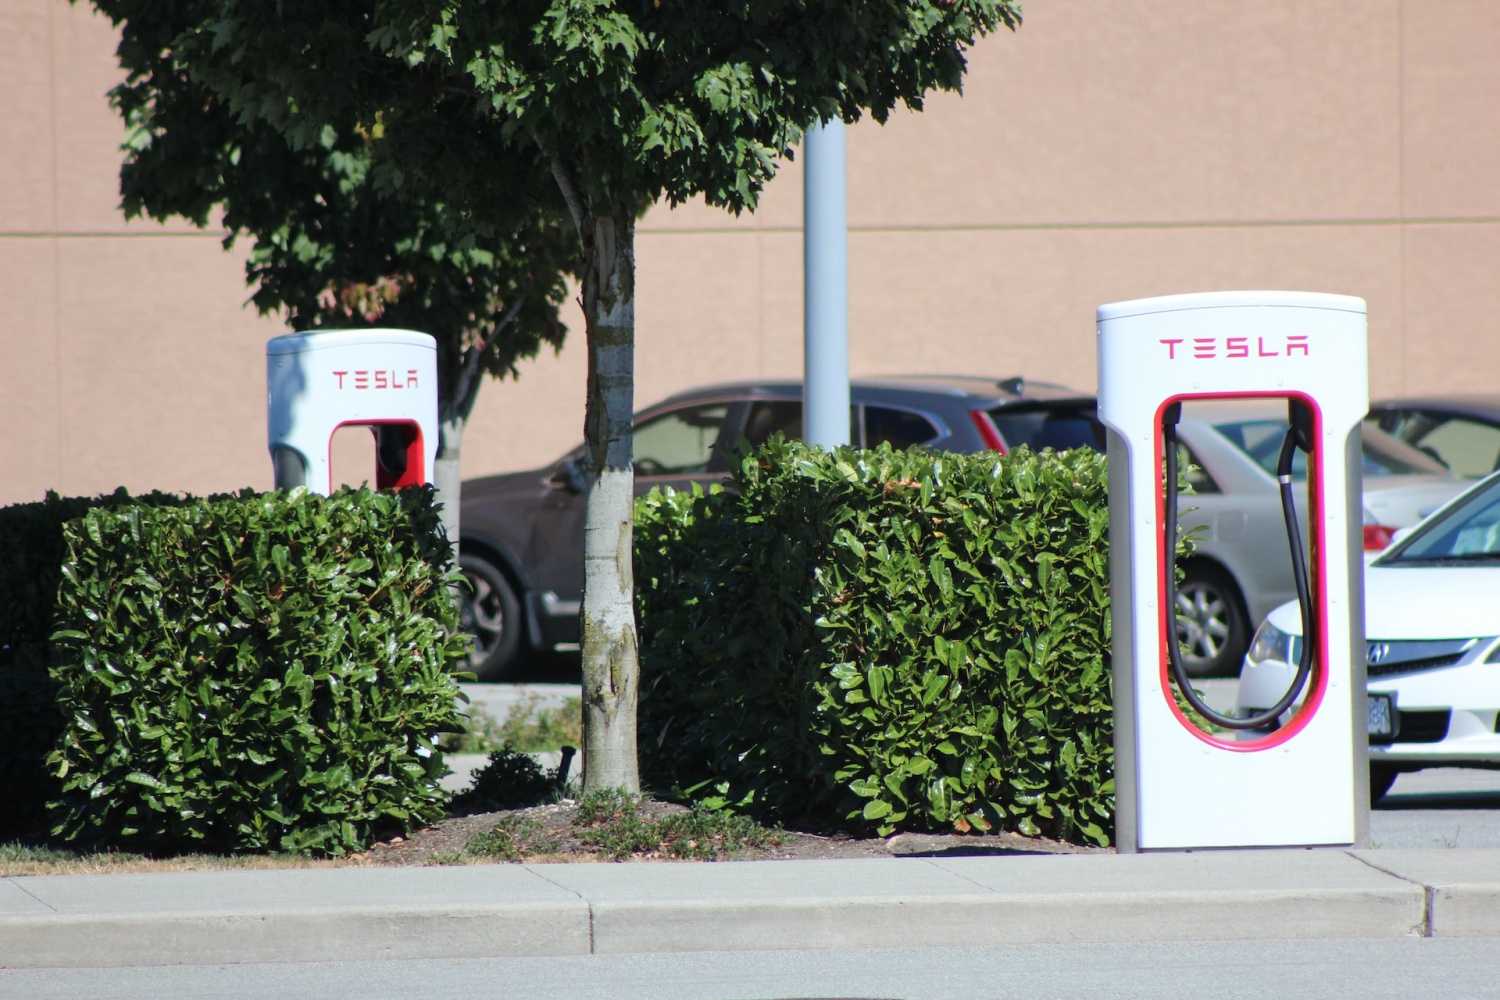 New Tesla V4 Supercharger With Credit Card Reader Revealed: What it is For?